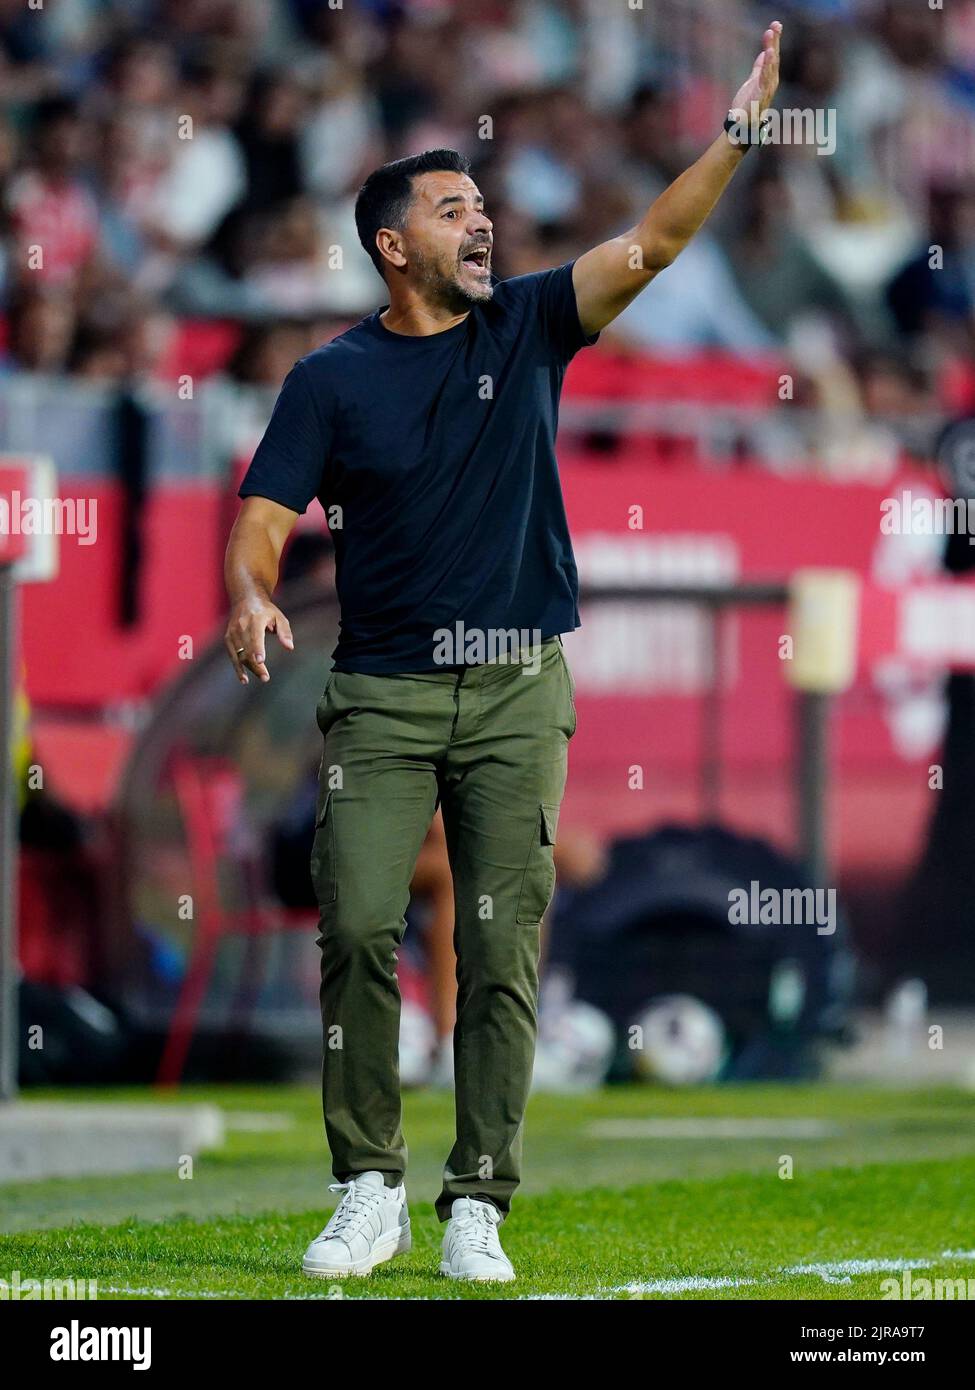 Girona FC manager Miguel Angel Sanchez Michel during the La Liga match between Girona FC and Getafe CF played at Montilivi Stadium on August 22, 2022 in Girona, Spain. (Photo by Sergio Ruiz / PRESSINPHOTO) Stock Photo